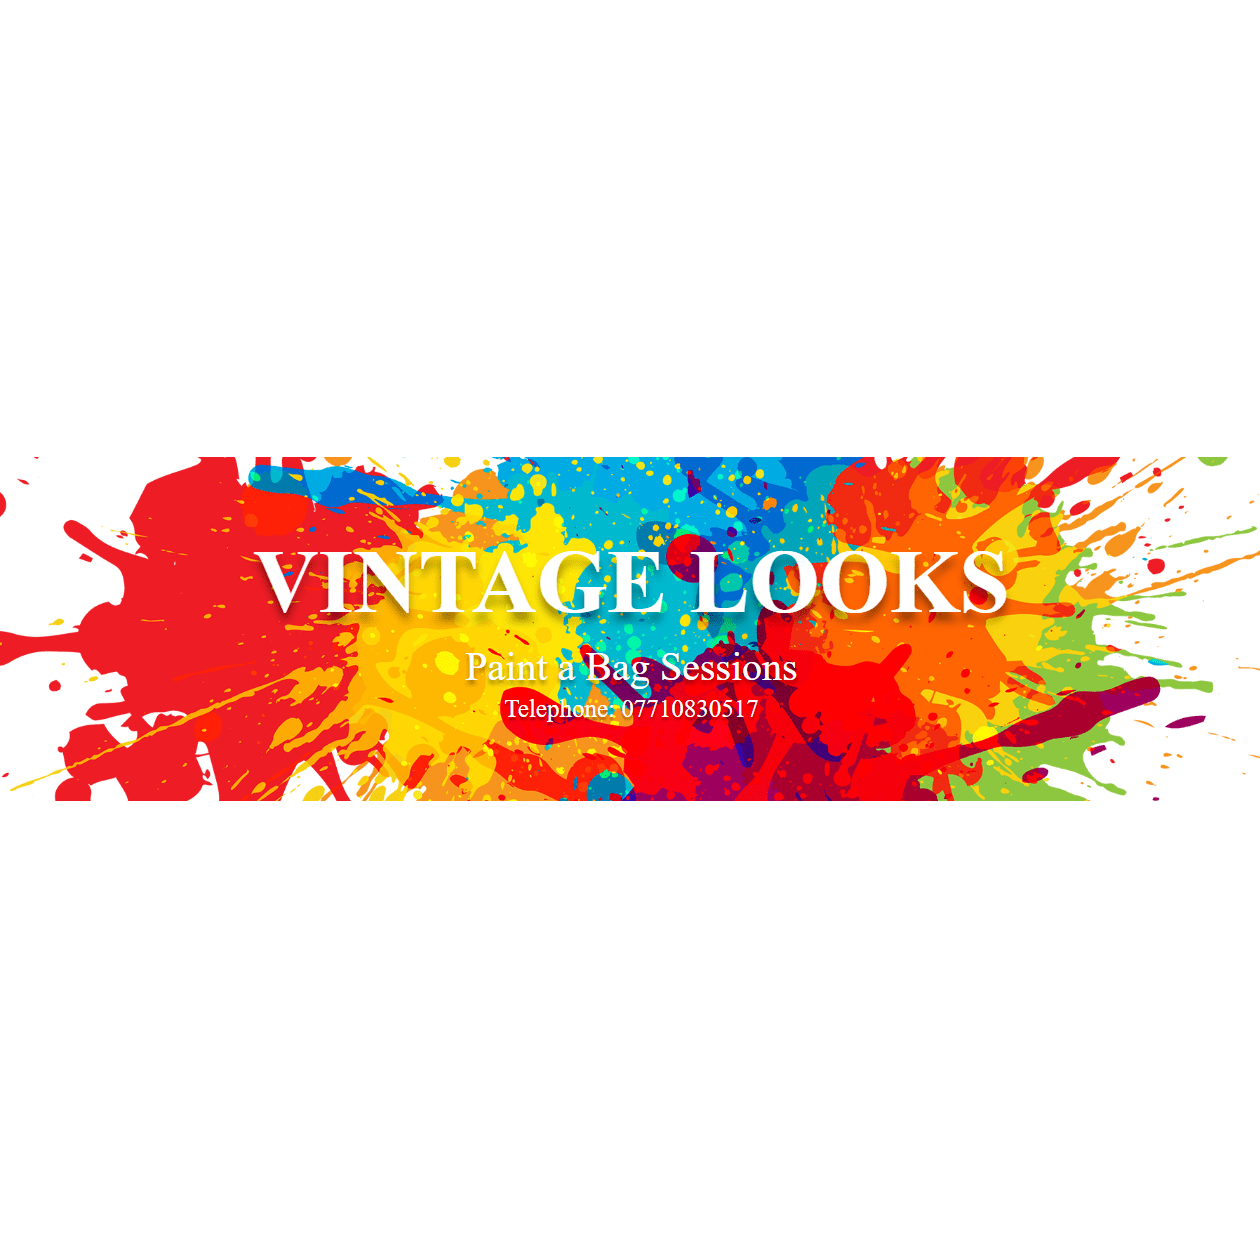 Vintage Looks - Steyning, West Sussex BN44 3RD - 07710 830517 | ShowMeLocal.com